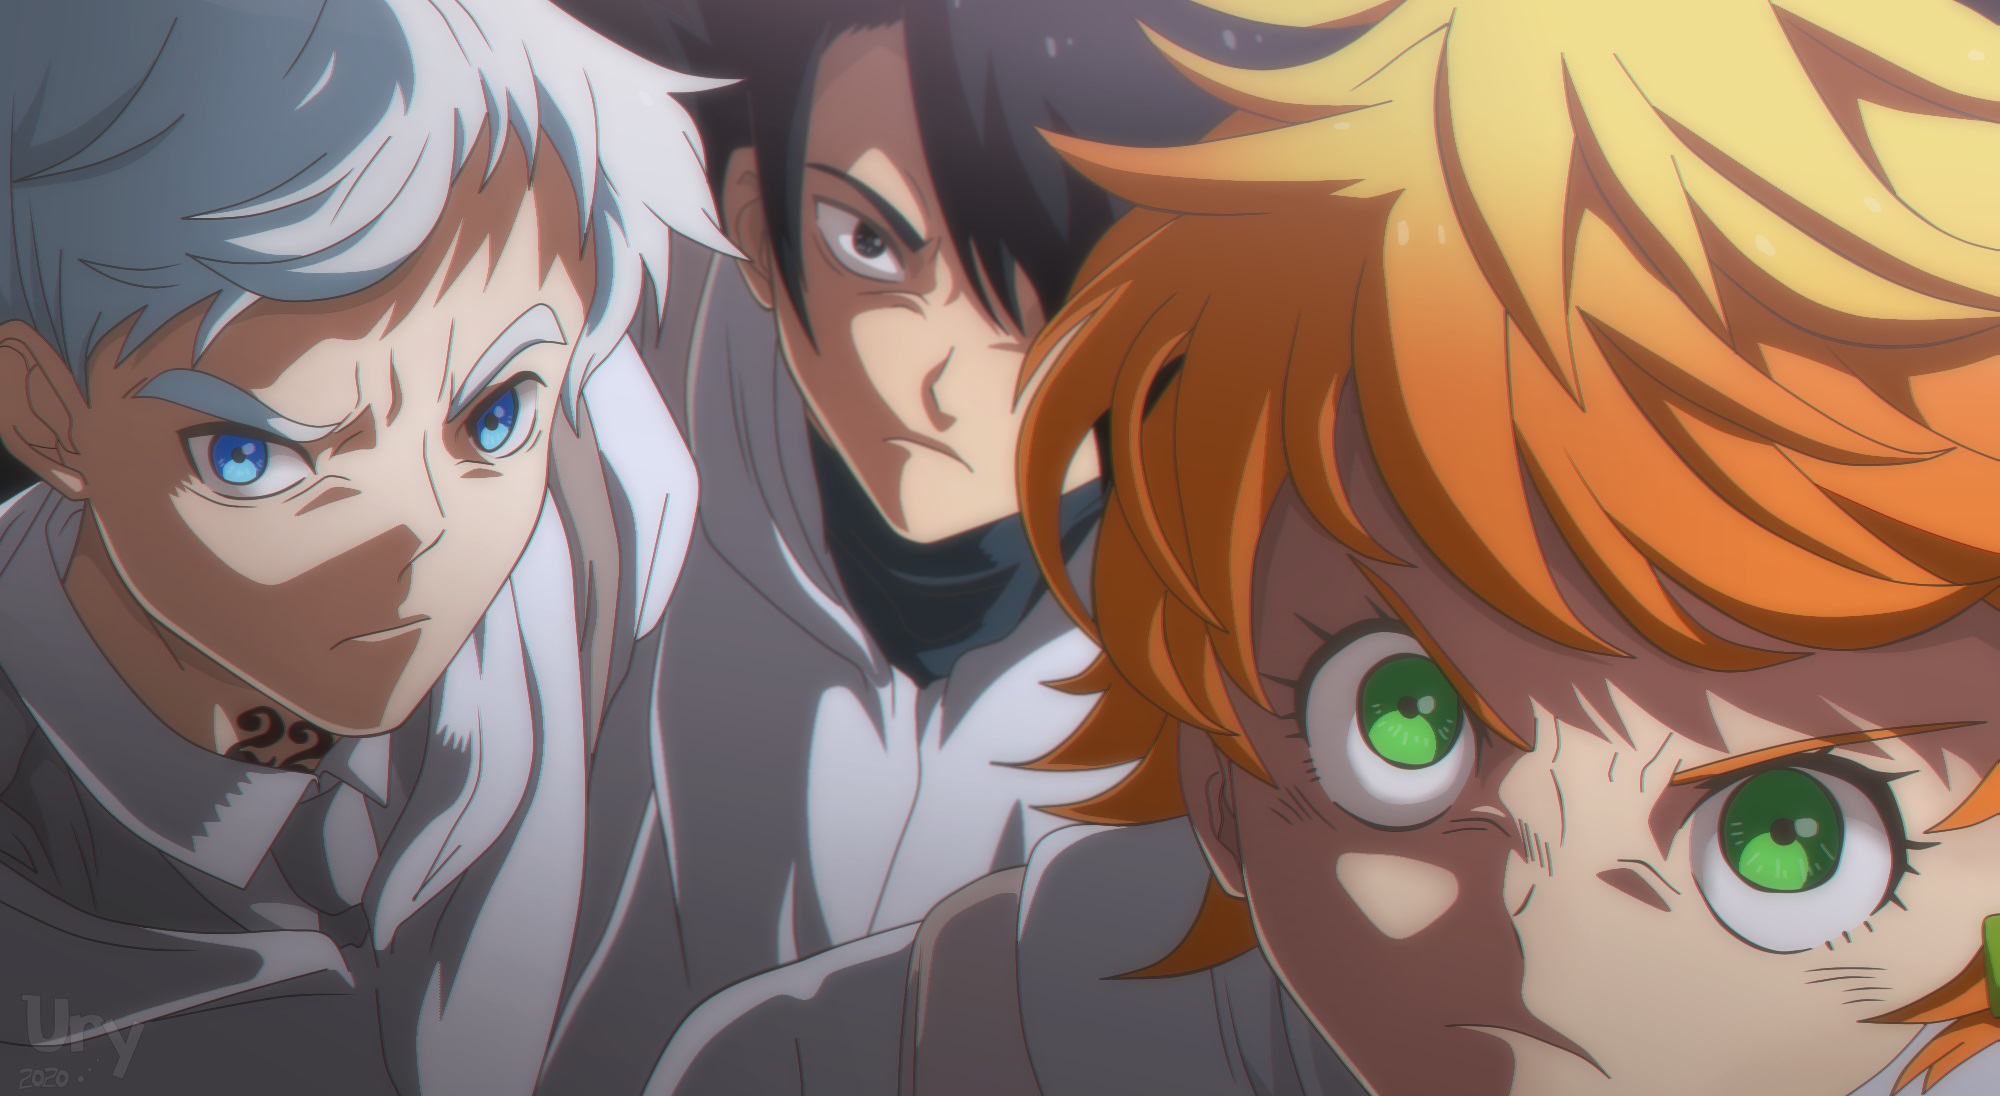 Emma The Promised Neverland Norman The Promised Neverland Ray The Promised Neverland 2000x1096